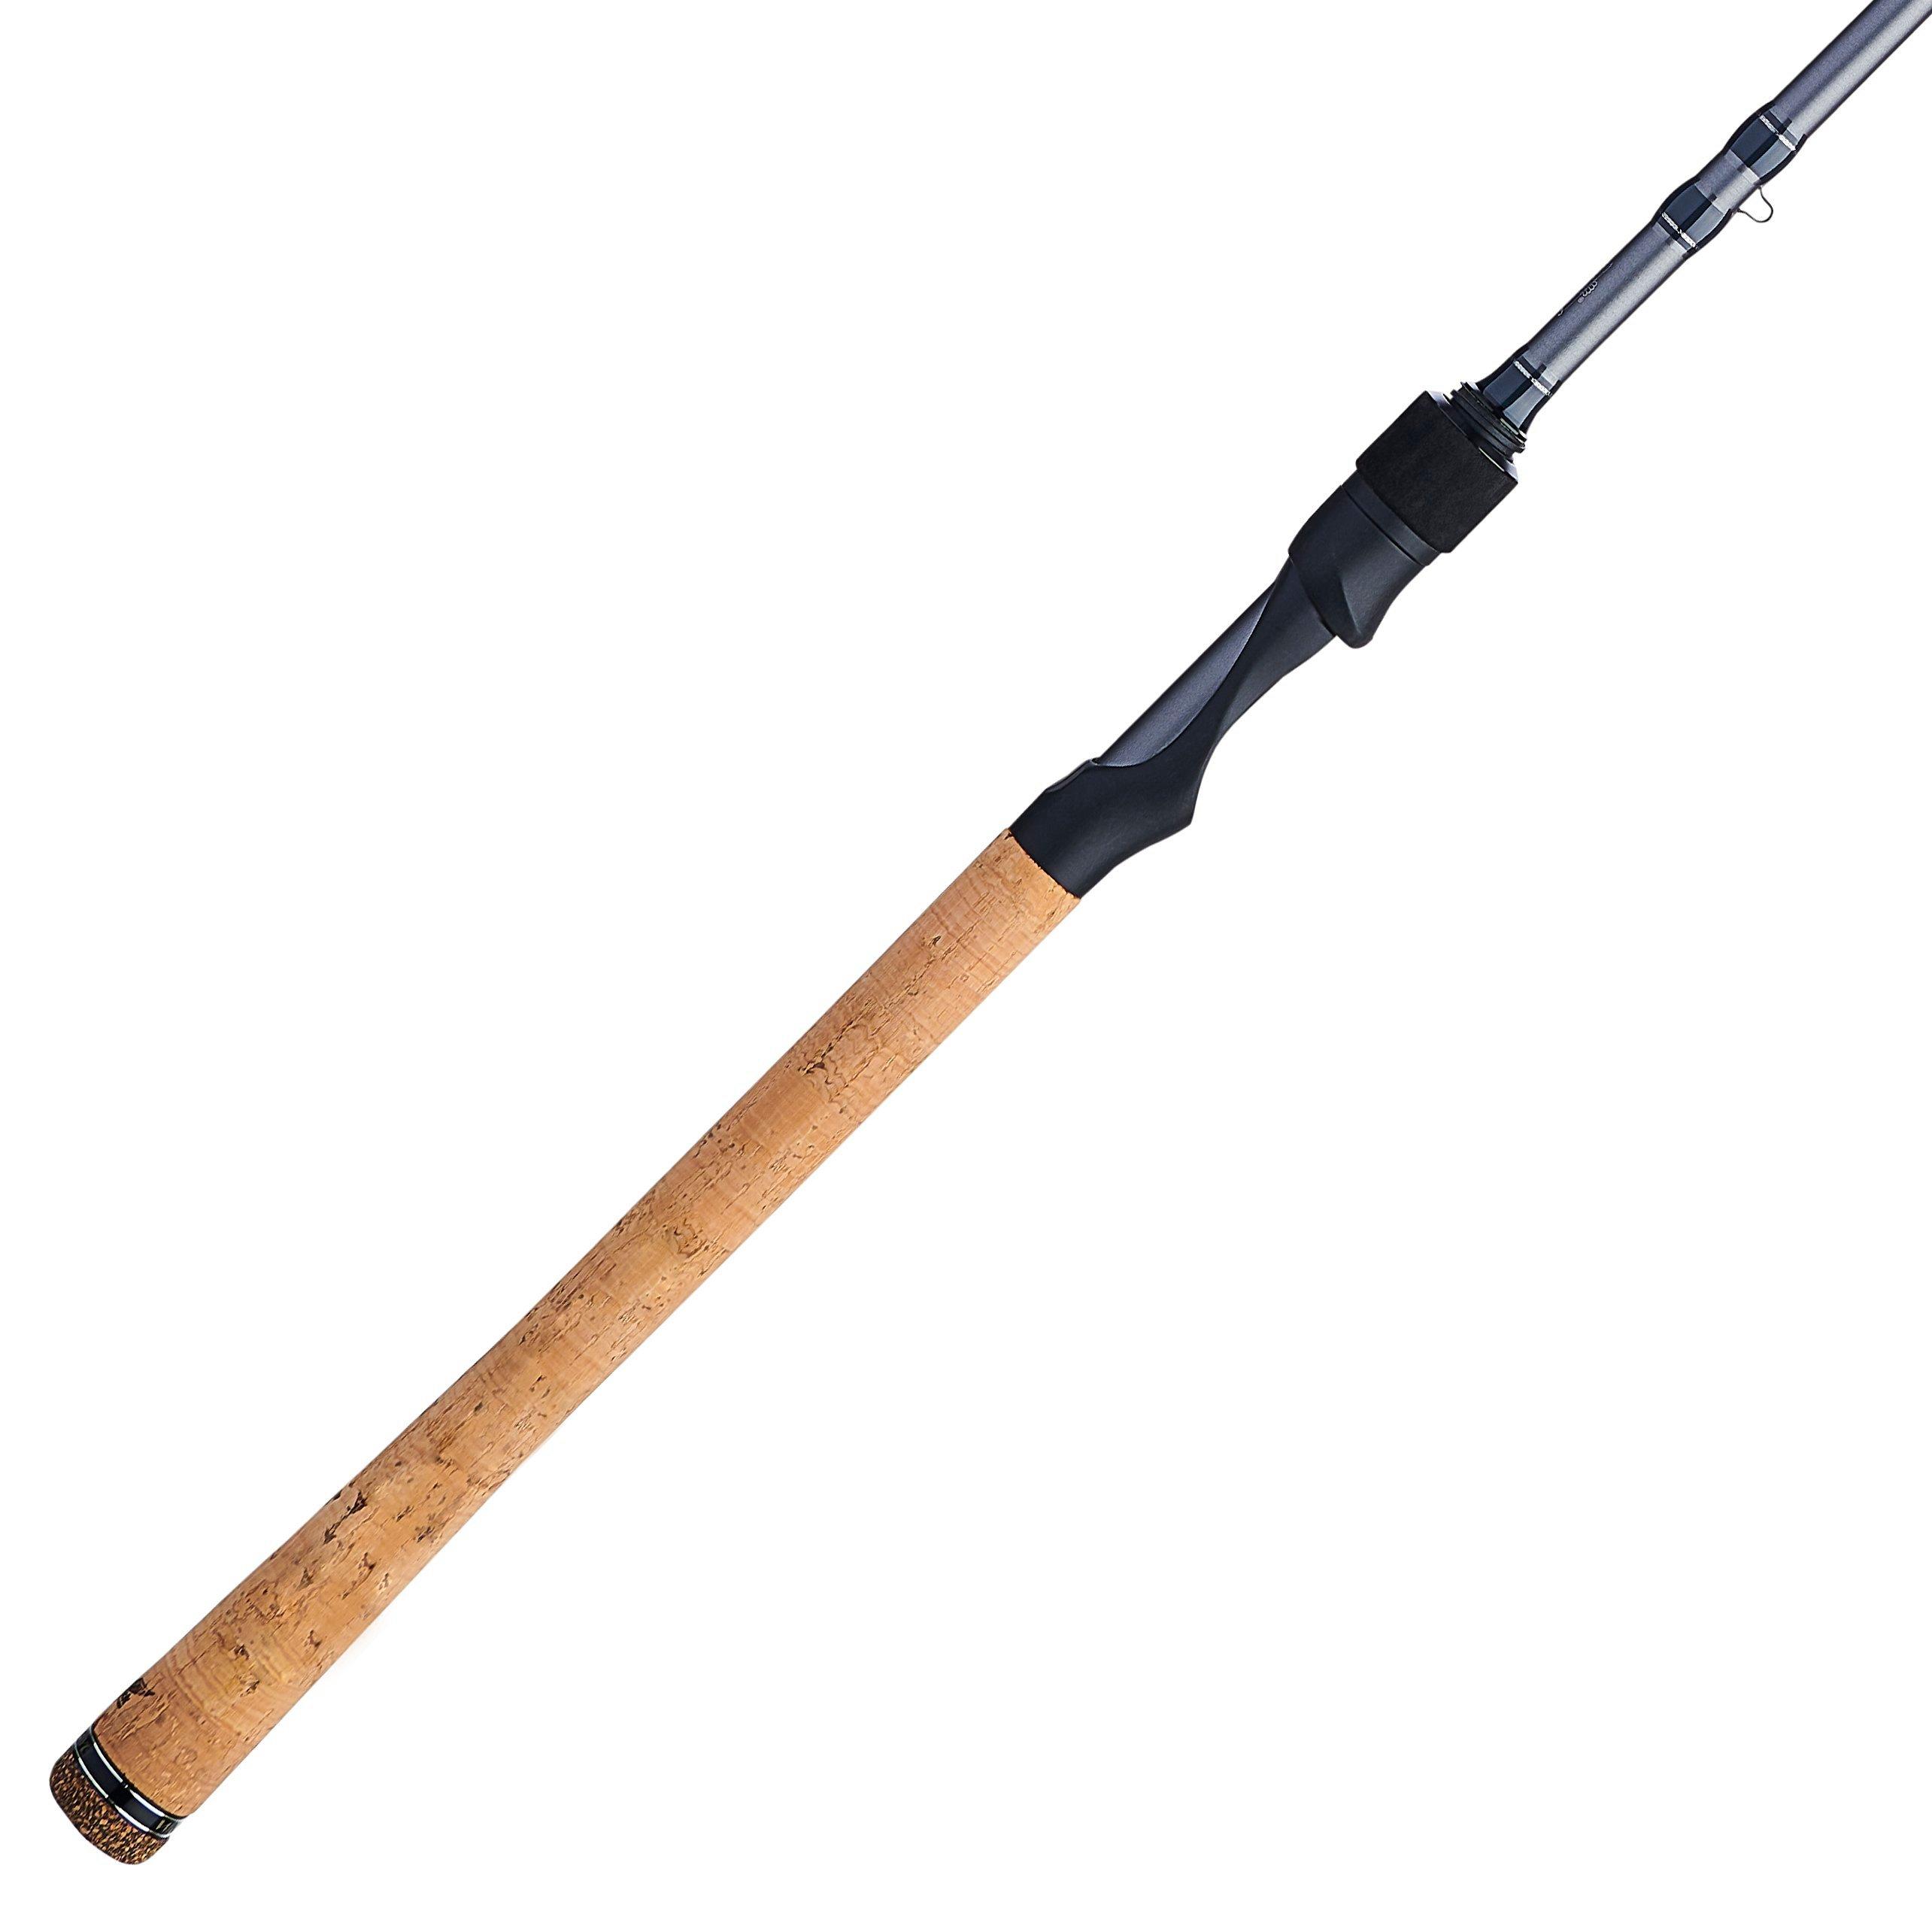 Pro Max Spinning Combo – Fisherman's Factory Outlet